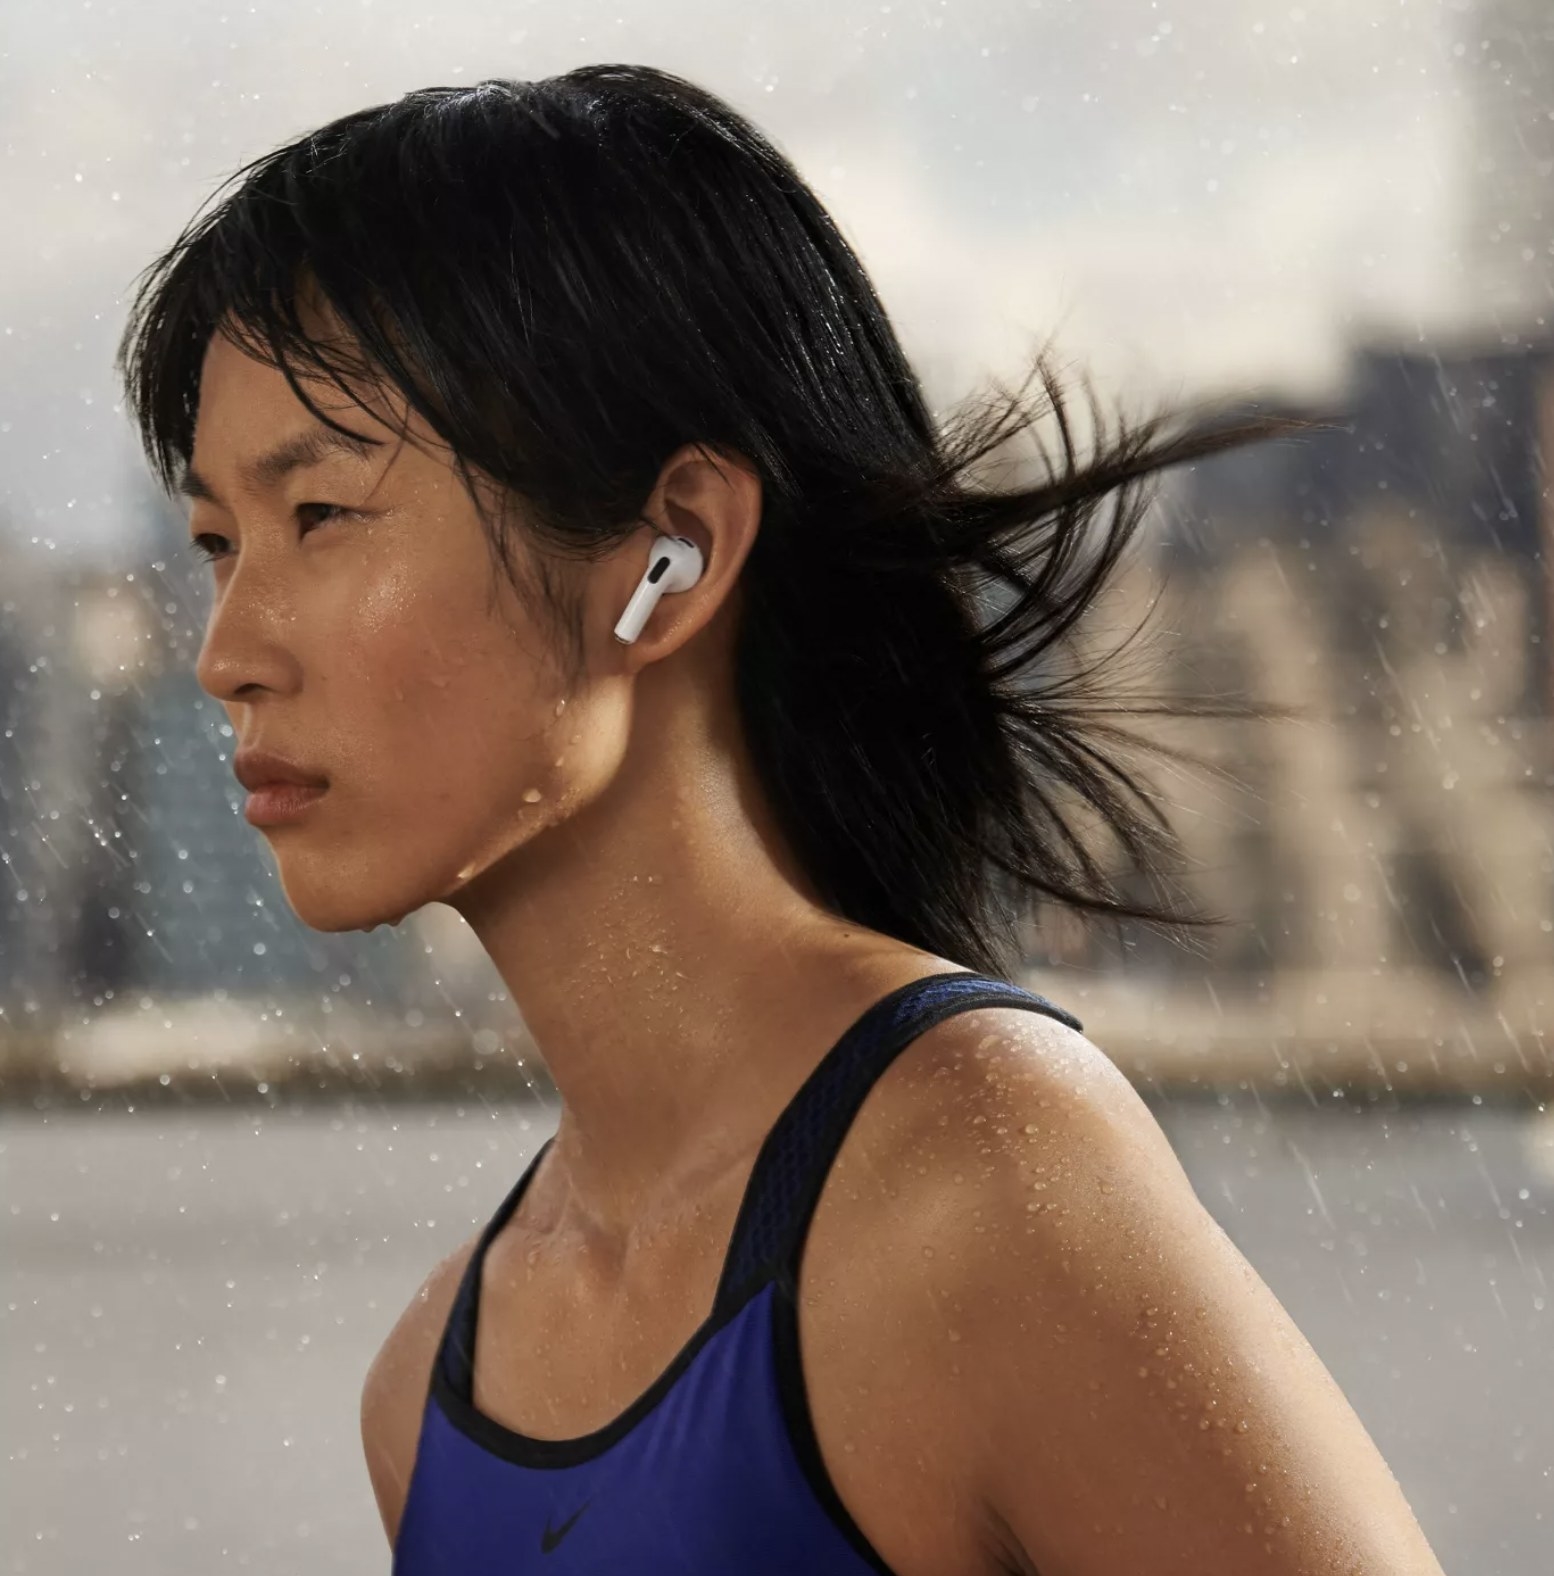 Model running in the rain with the airpods in her ear